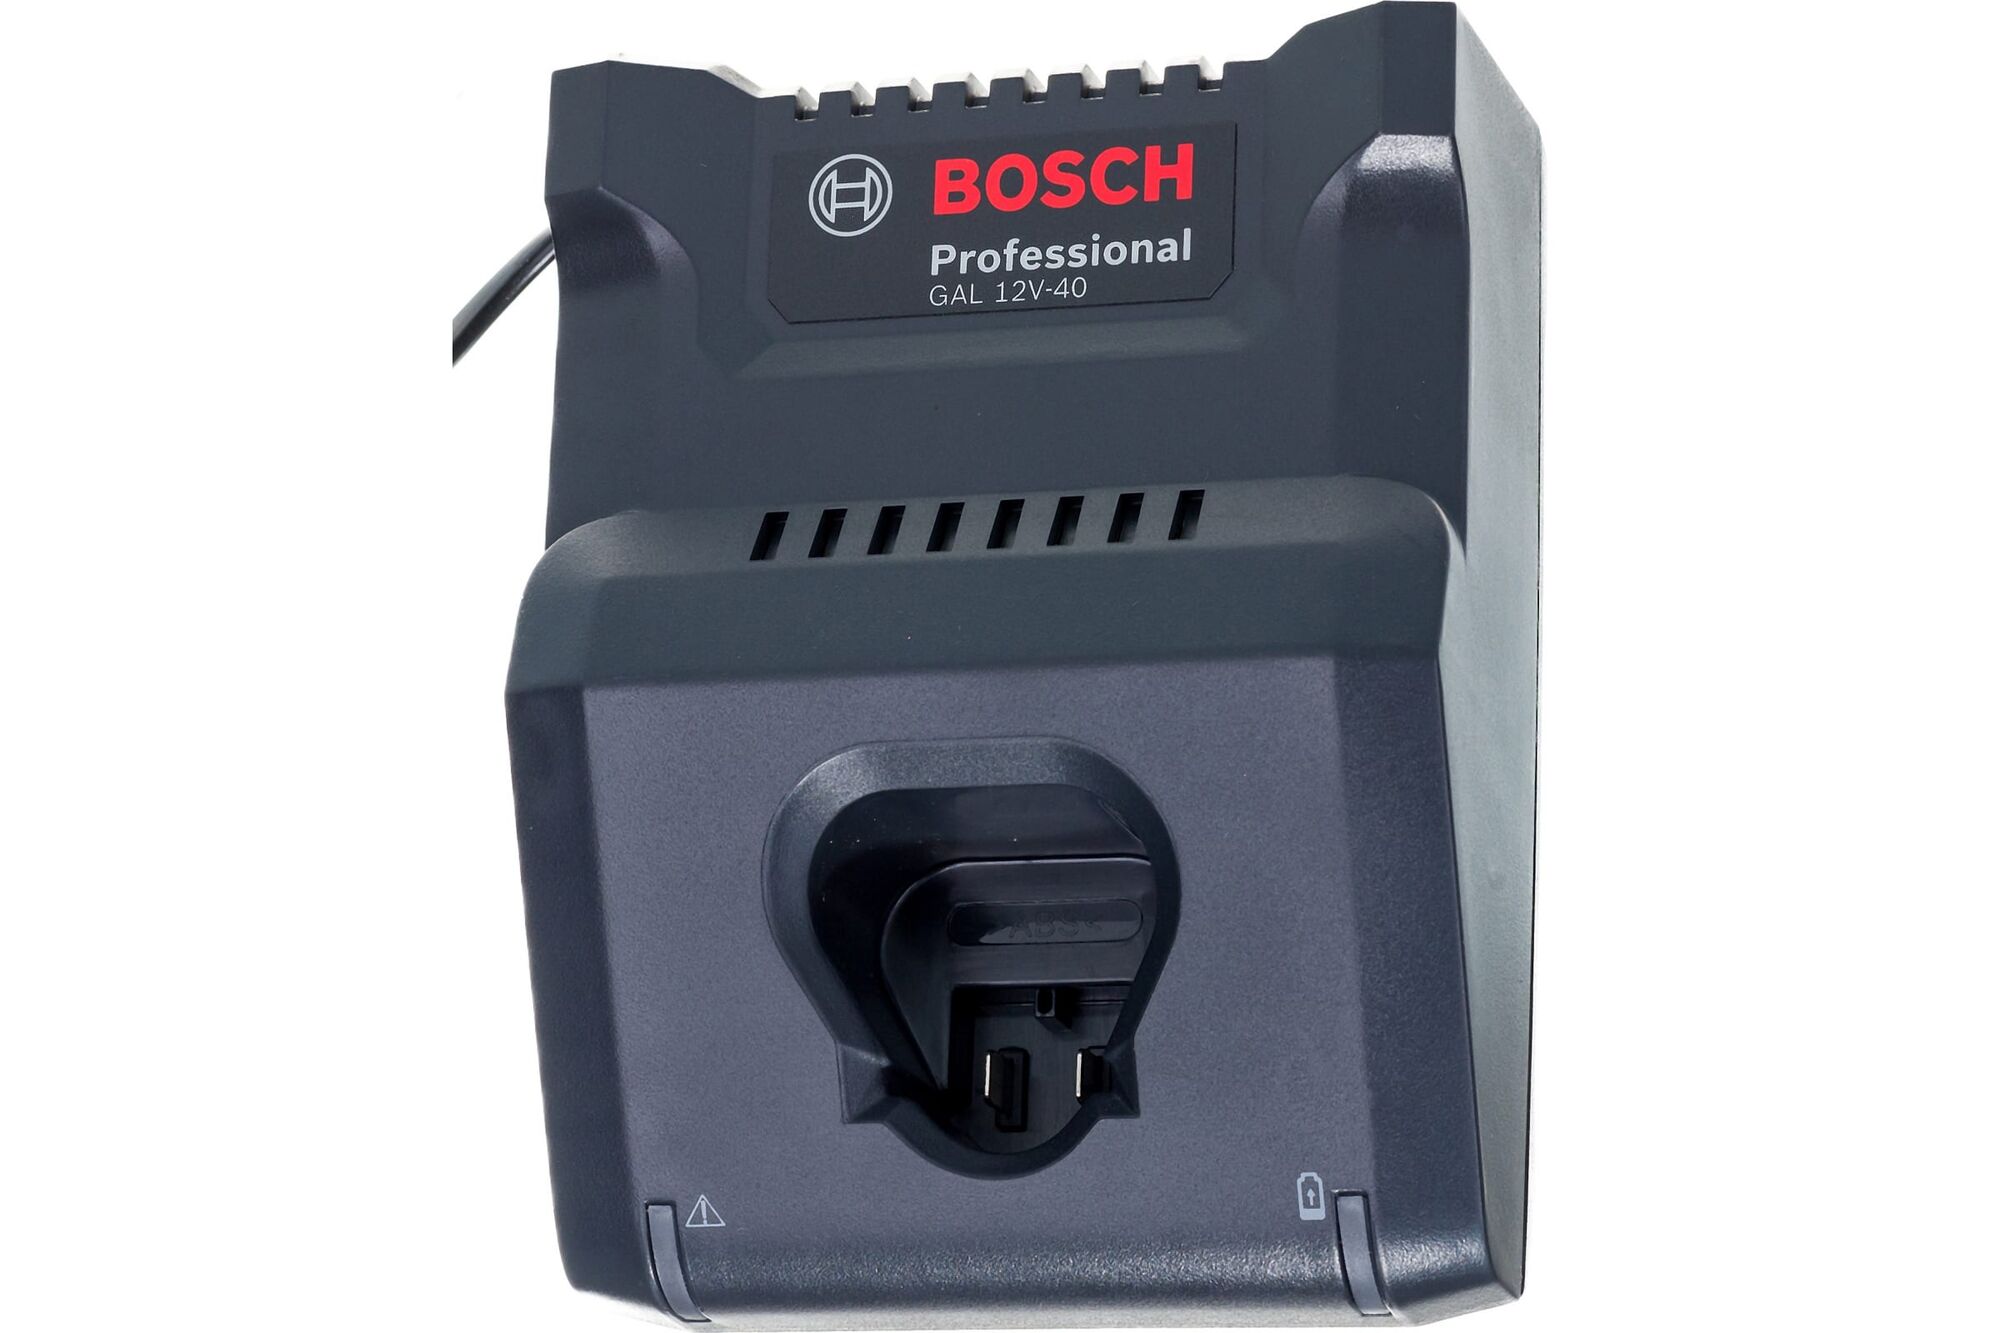 Chargeur BOSCH 1600A019R3 - GAL 12V-40 Professional